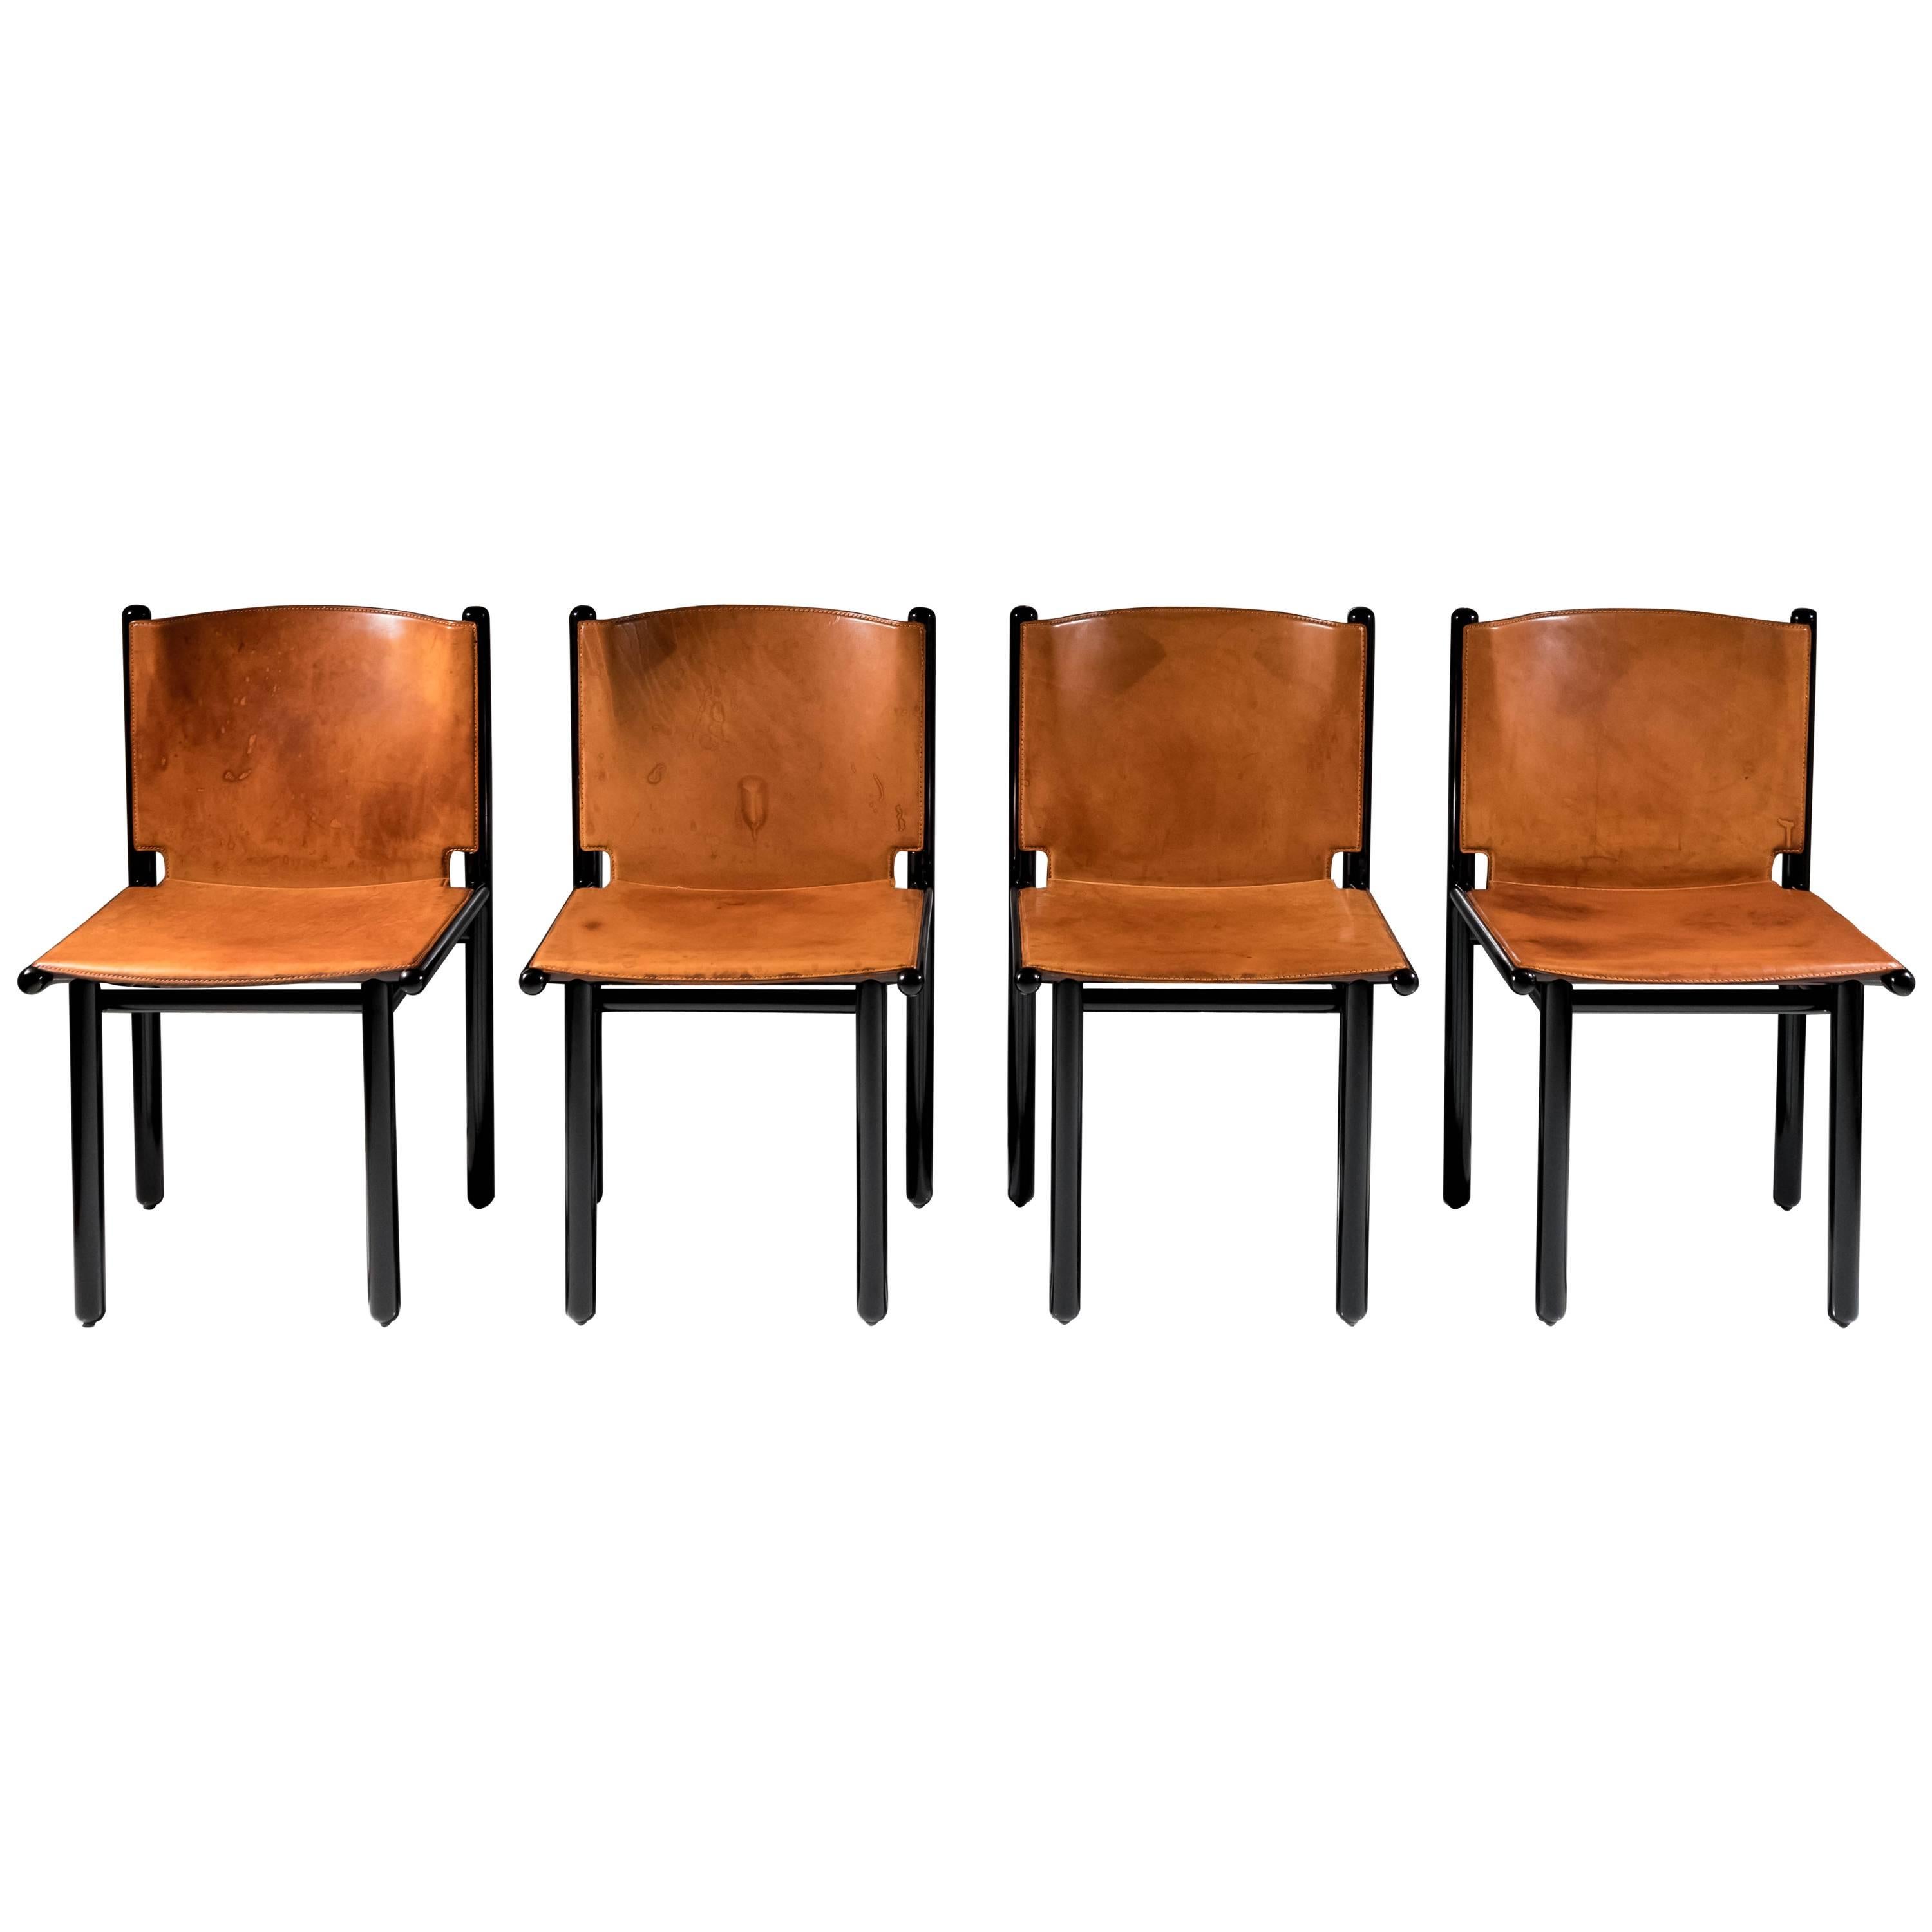 Set of Four Natural Leather 'Caprile' Chairs by G.F. Frattini for Cassina, 1985